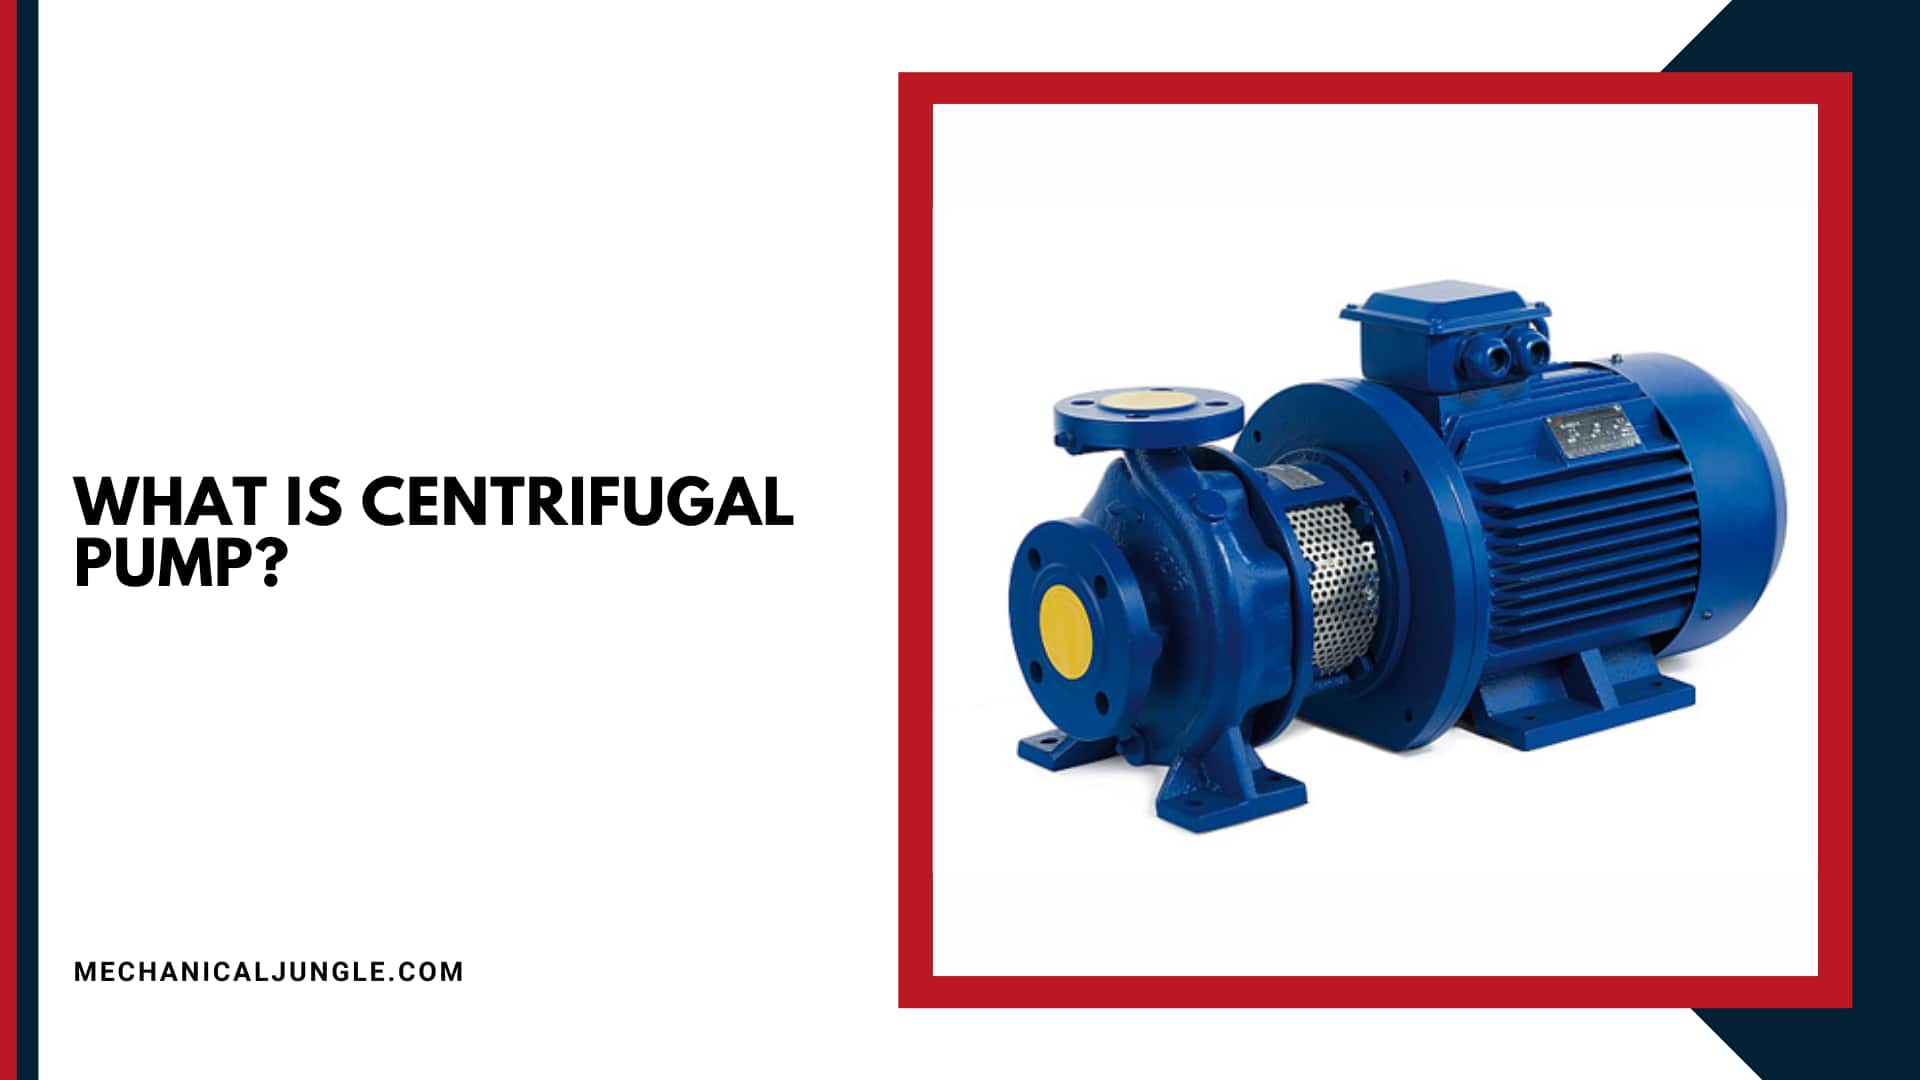 What Is Centrifugal Pump?